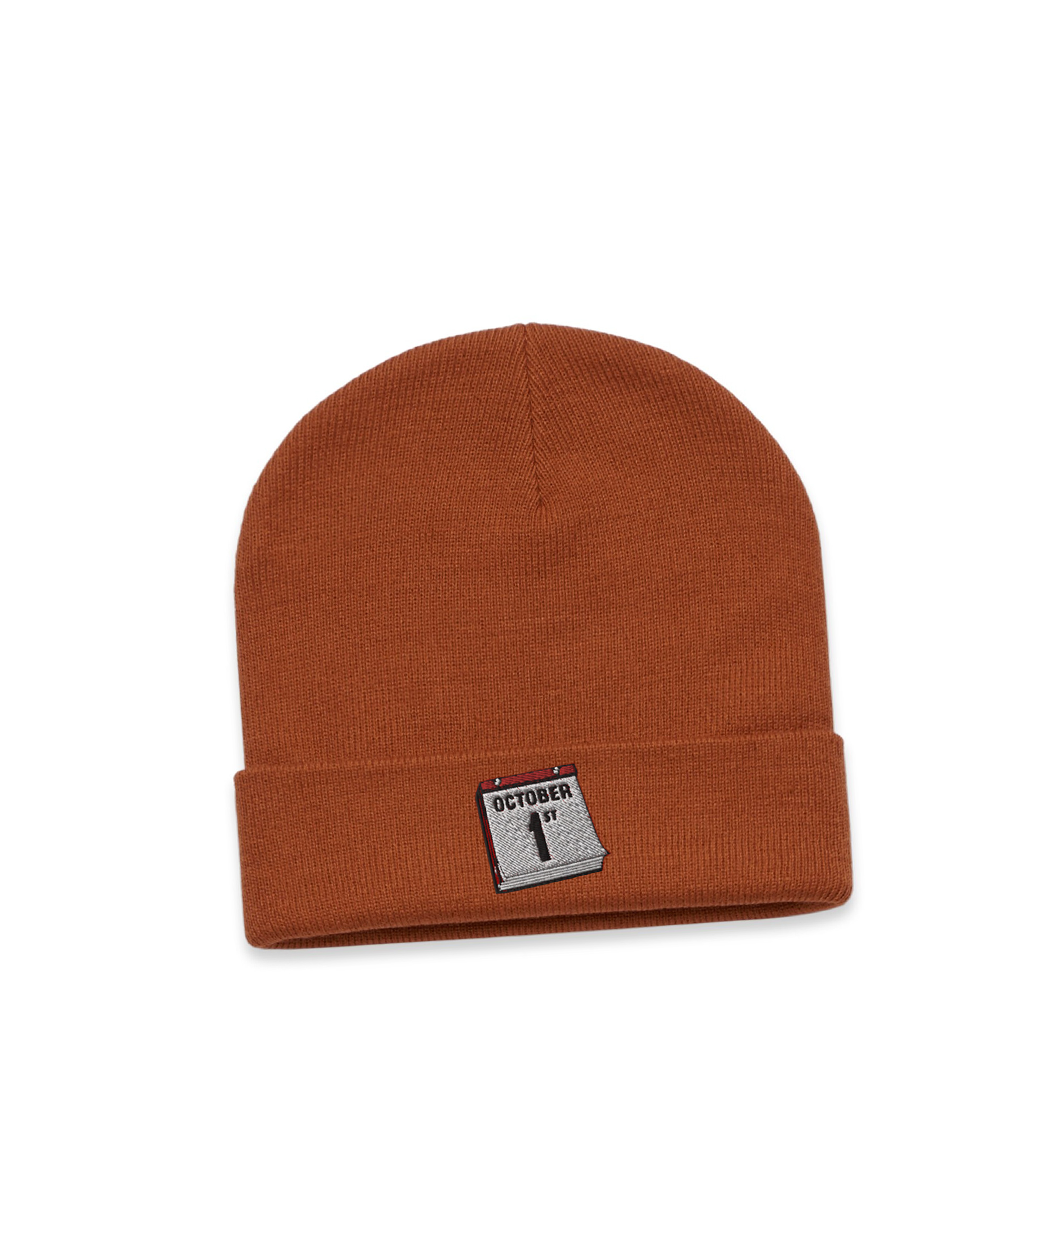 An orange beanie with a small calendar page turned to October 1st embroidered on the front.